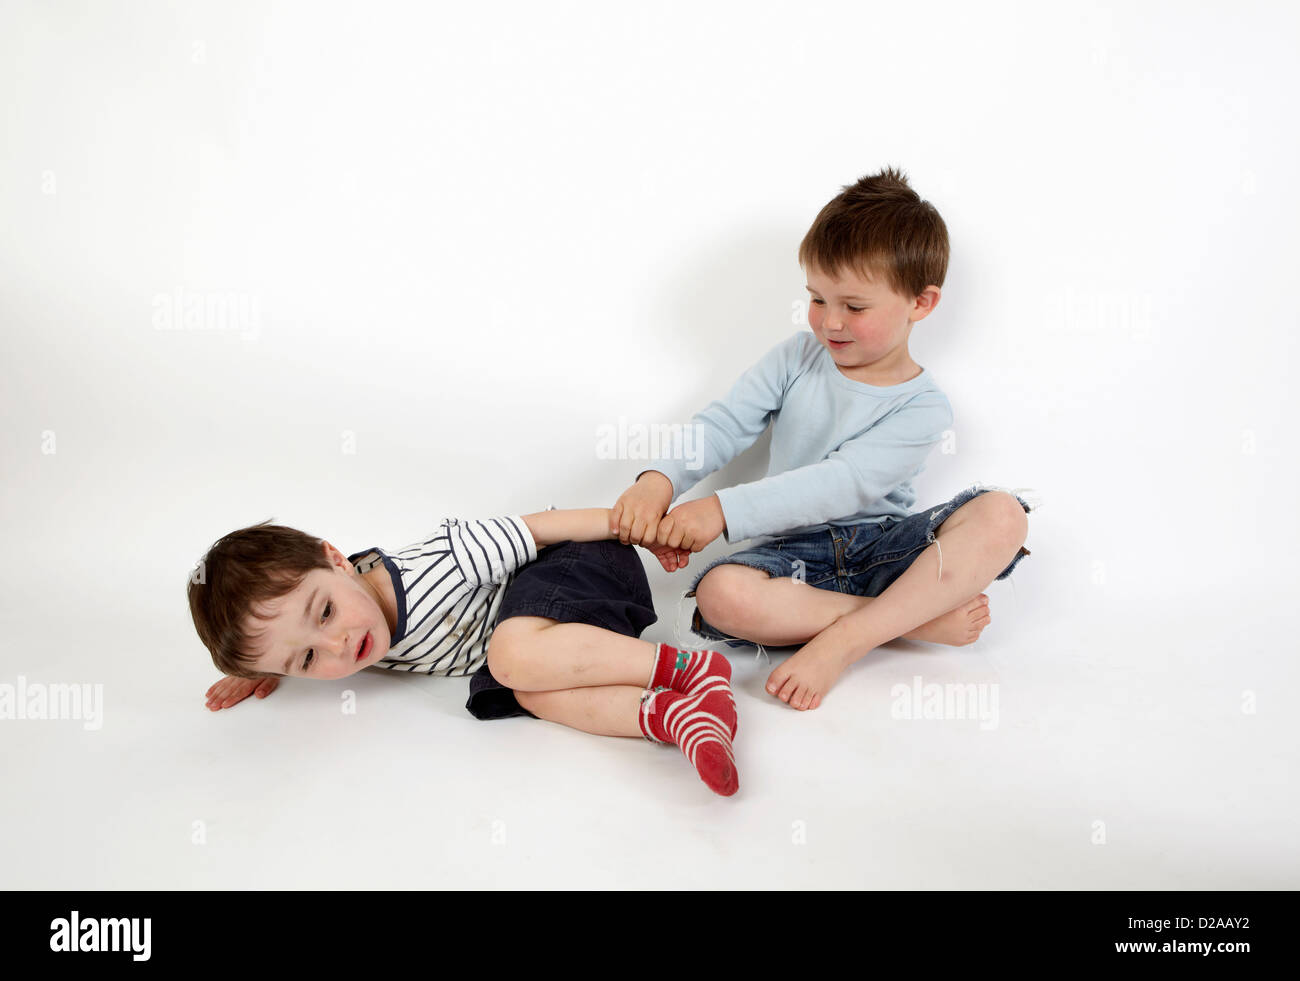 Boys playing together on floor Stock Photo